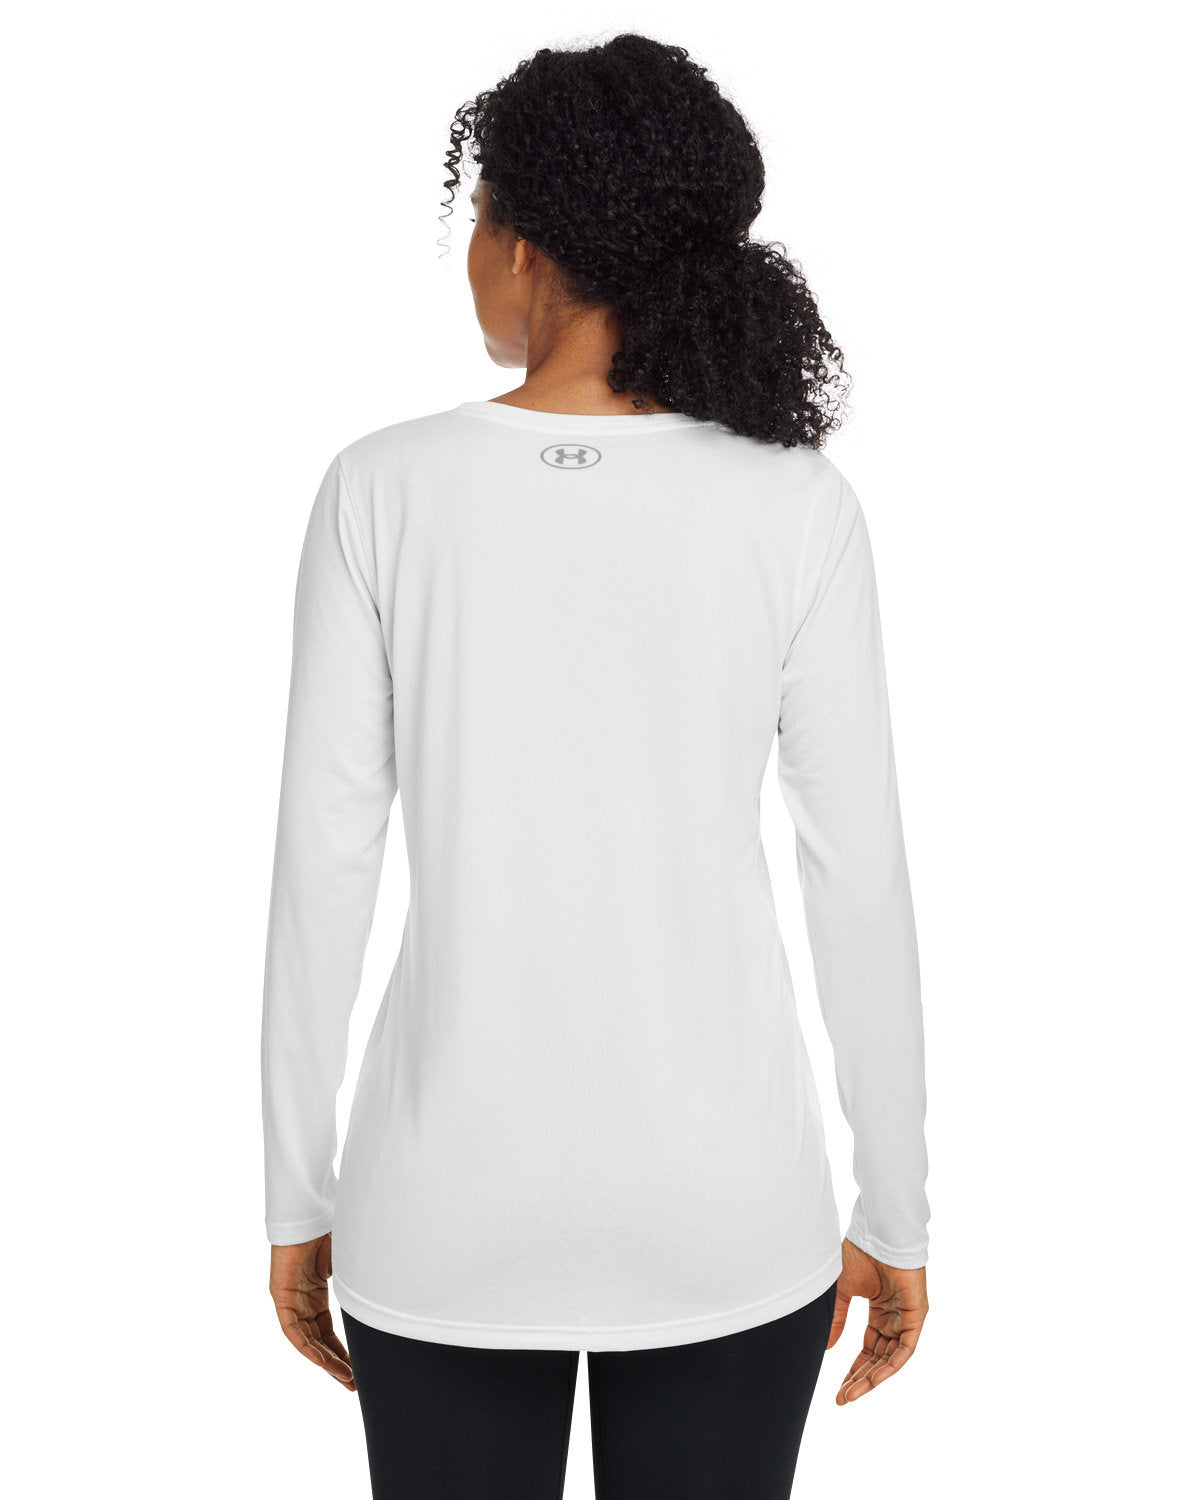 Under Armour Ladies Tech Long-Sleeve Customized T-Shirts, White